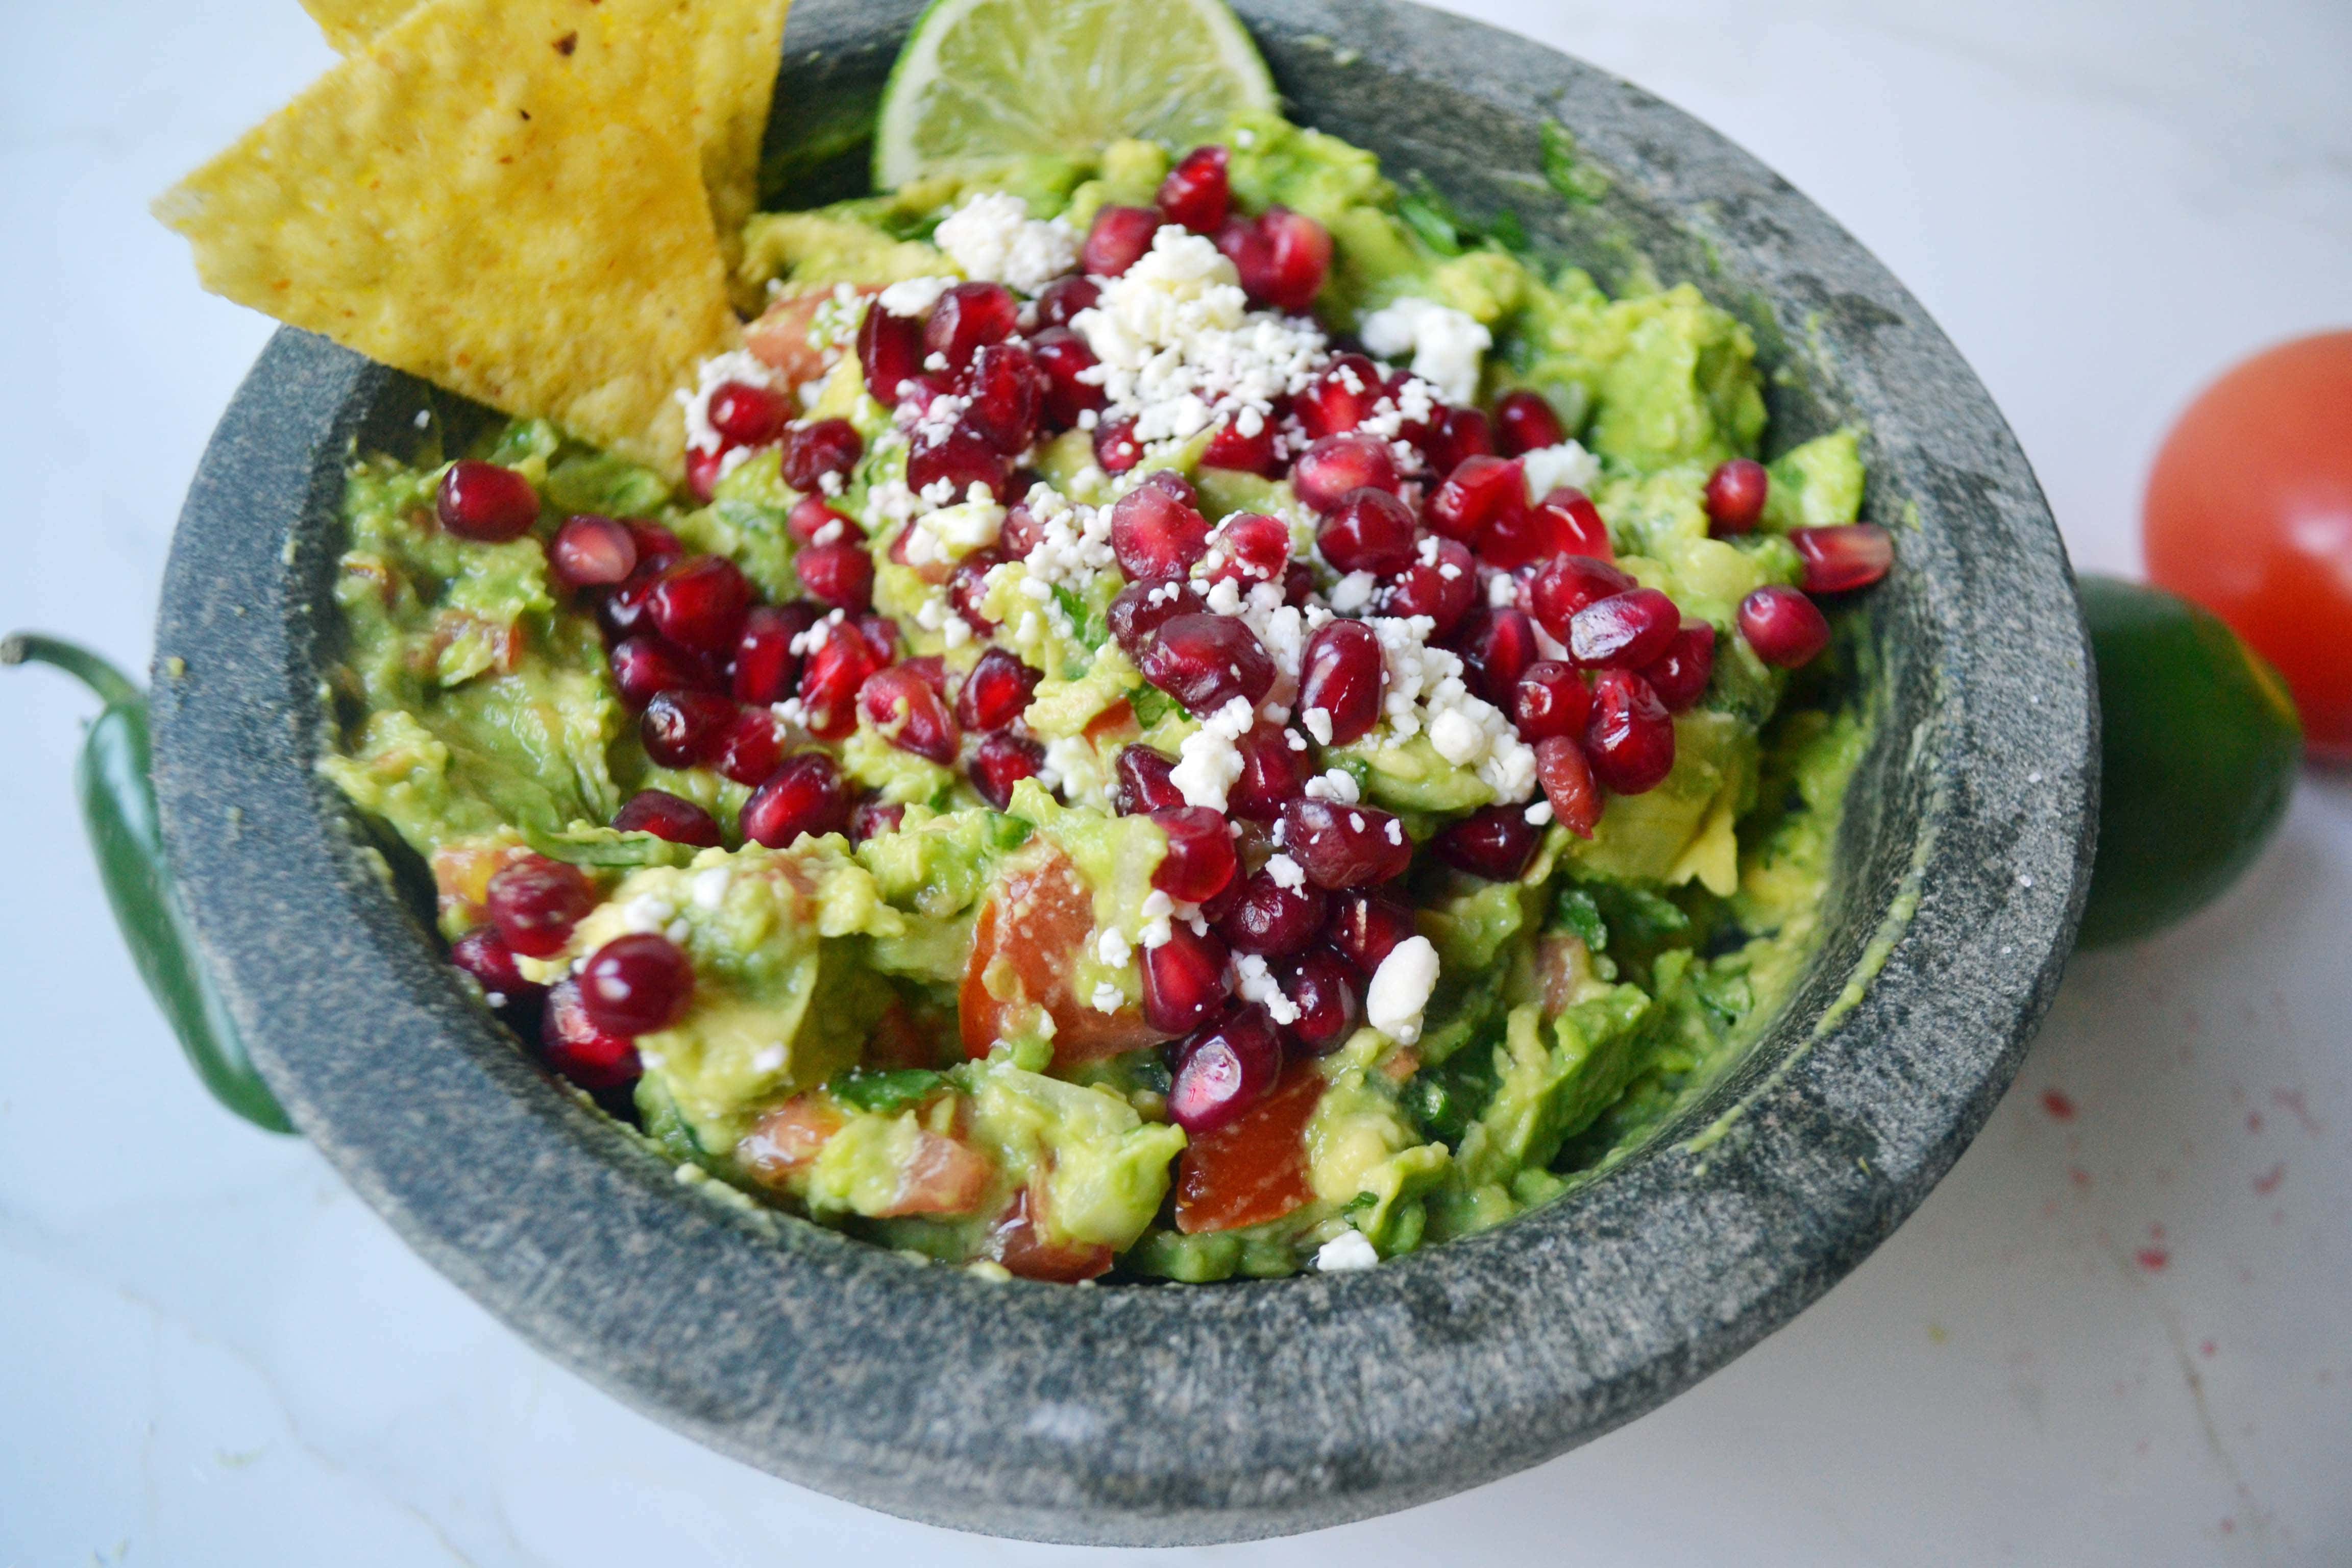 Best Ever Homemade Guacamole with pomegranate and Homemade Chips by Modern Honey - www.modernhoney.com